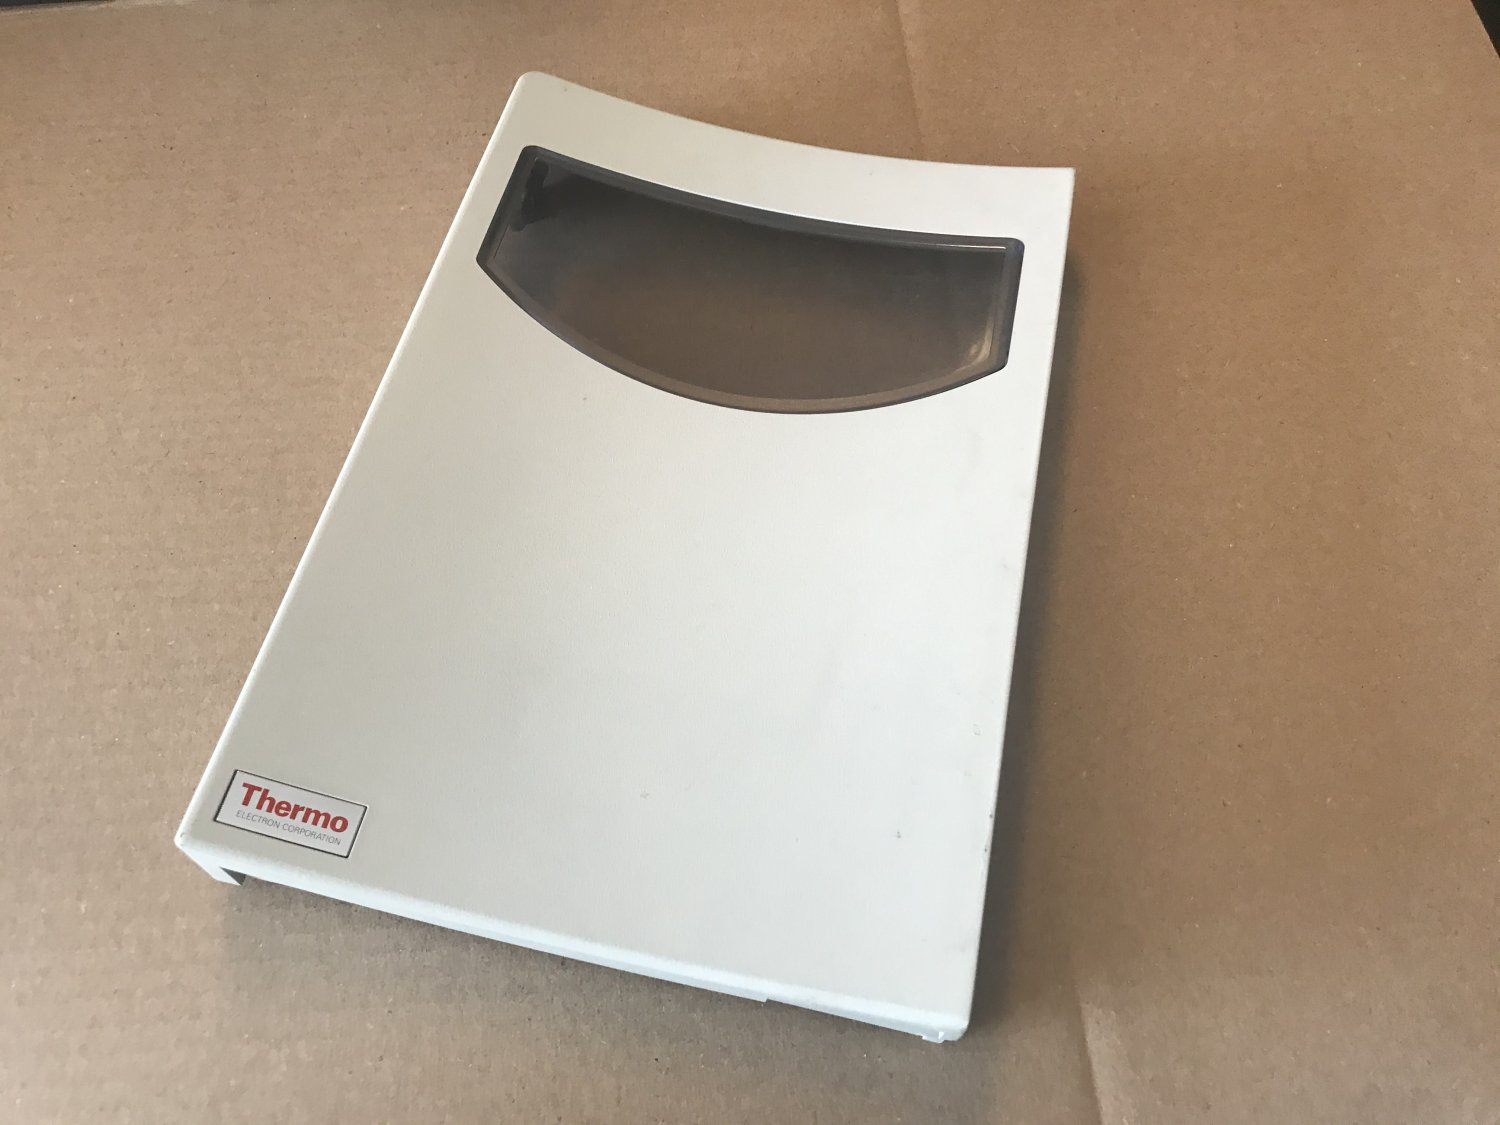 Thermo Finnigan Surveyor Autosampler Tray Compartment Door Cover